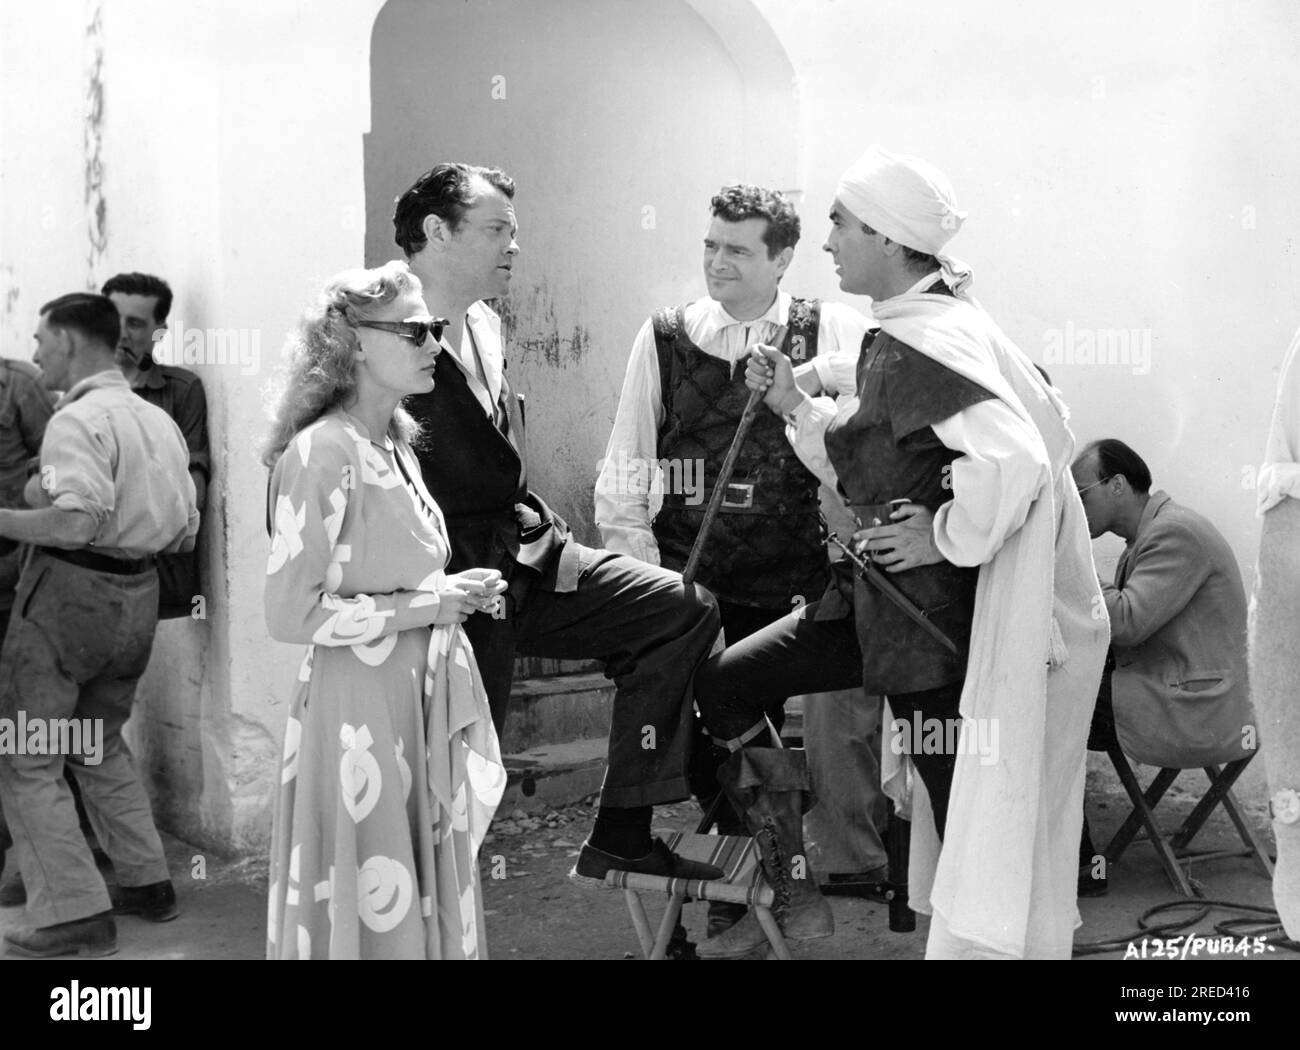 ORSON WELLES with SUZANNE CLOUTIER (his new Desdemona for his film of OTHELLO) JACK HAWKINS TYRONE POWER and behind Cinematographer JACK CARDIFF on set location candid in Morocco during filming of THE BLACK ROSE 1950 director HENRY HATHAWAY novel Thomas B. Costain screenplay Talbot Jennings music Richard Addinsell cinematography Jack Cardiff costumes Michael Whittaker Twentieth Century Fox Stock Photo